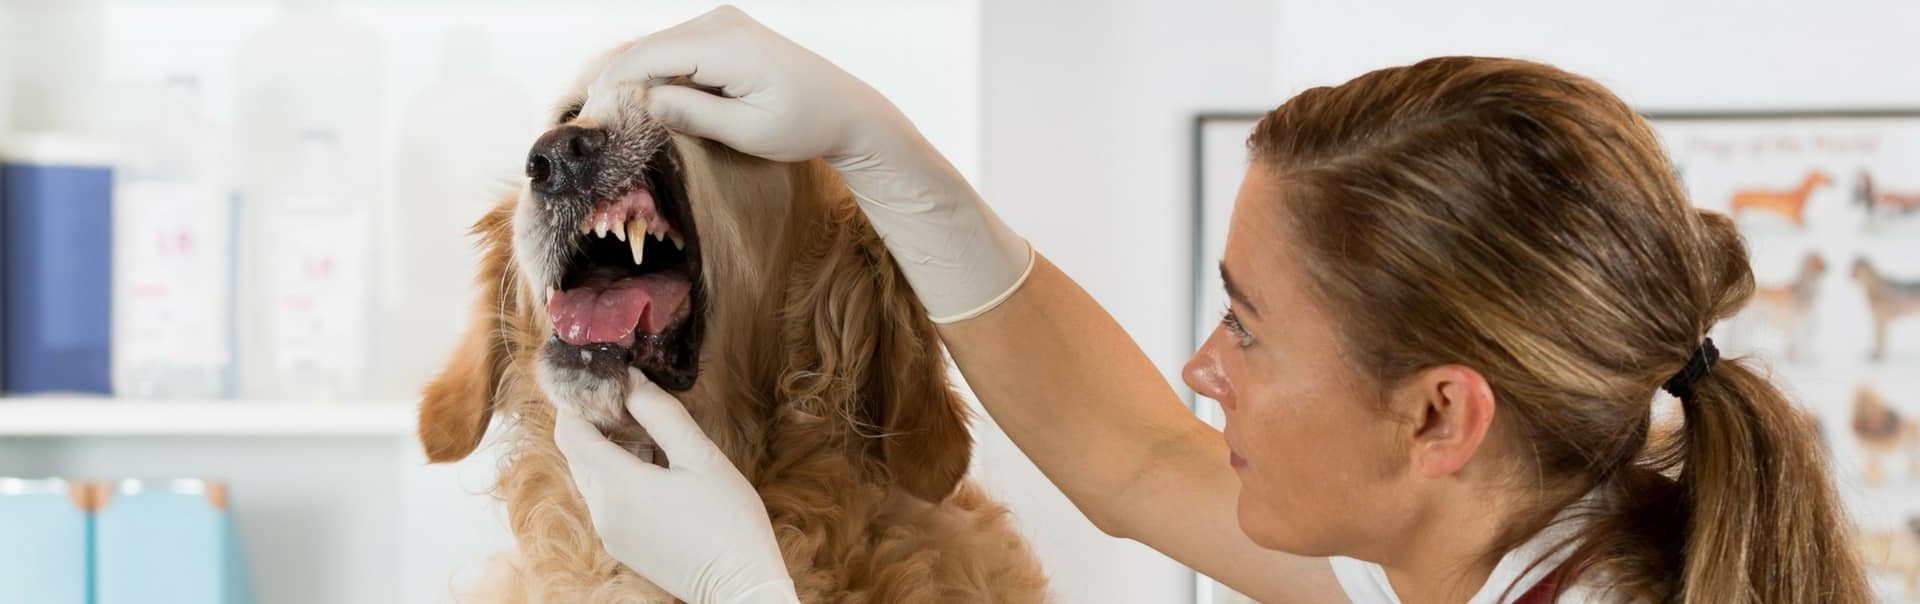 A female vet wearing gloves examines a dog's mouth